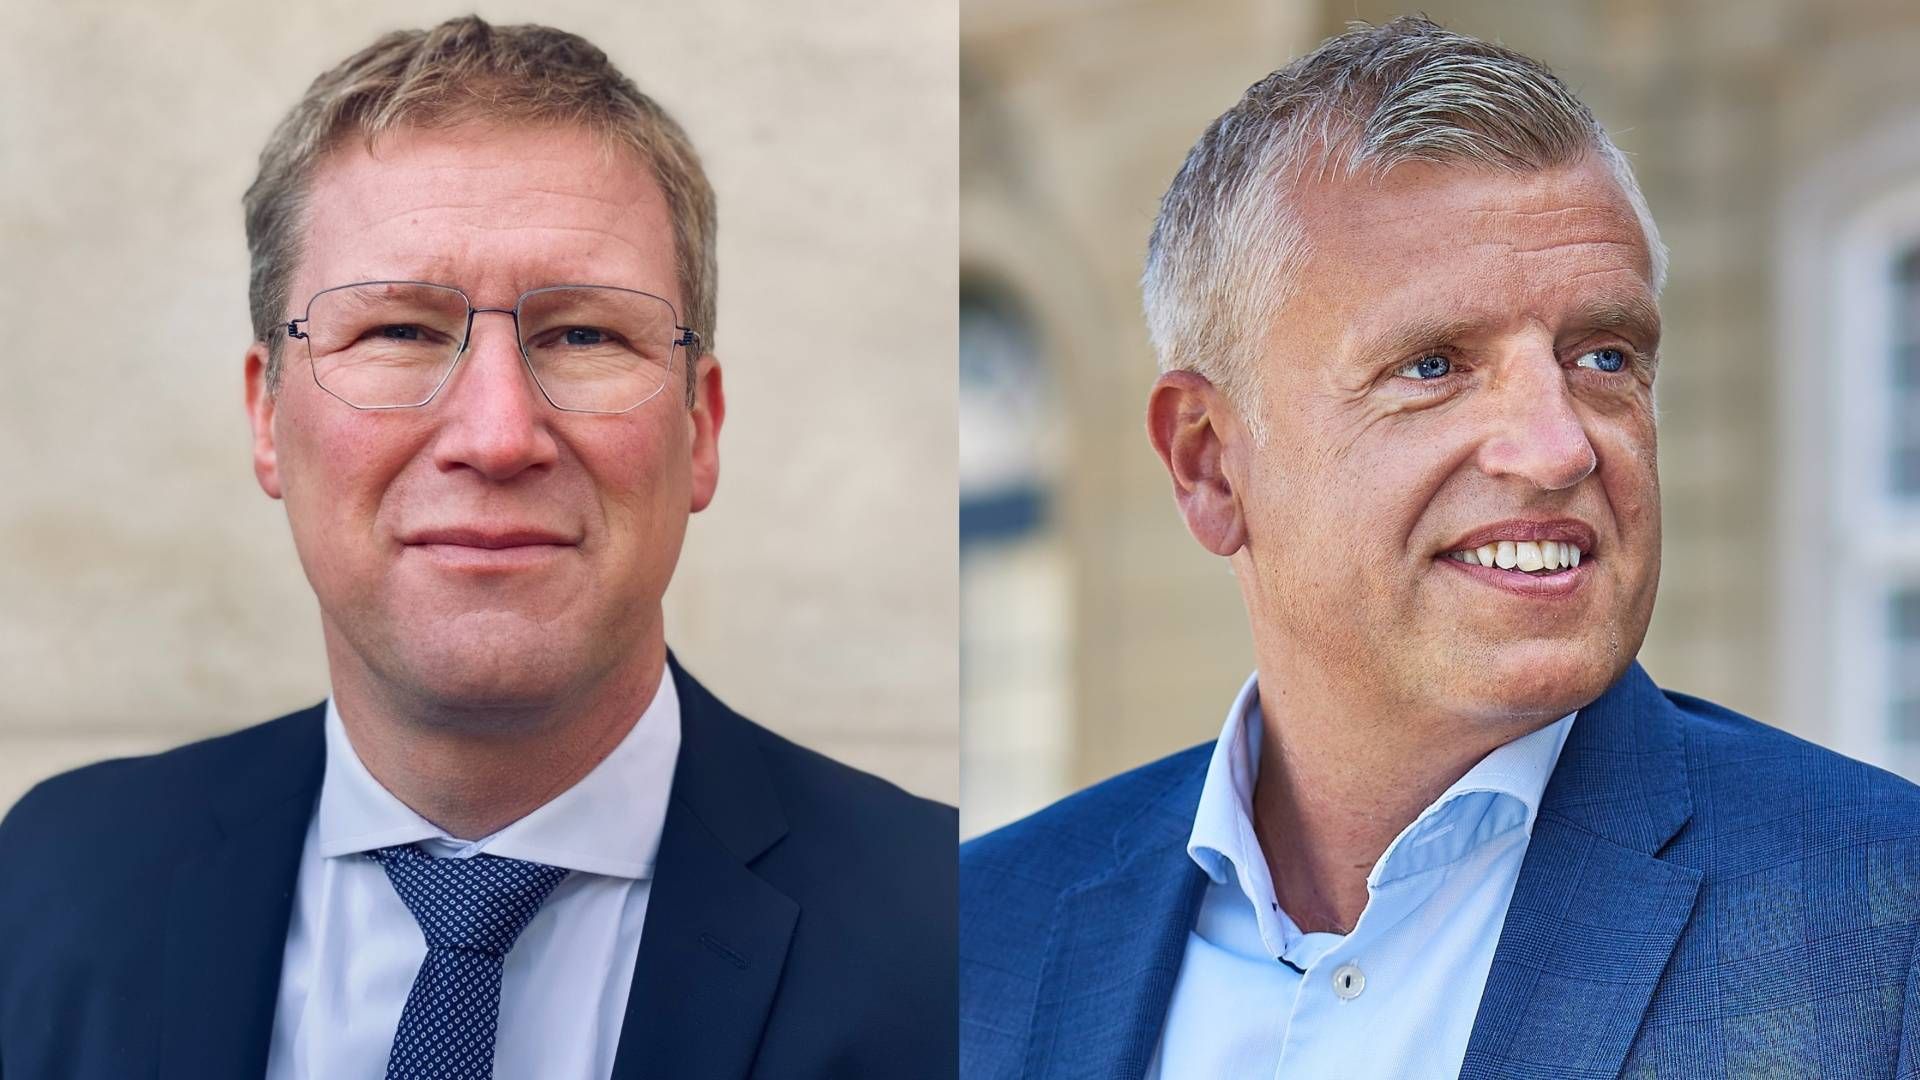 Jan Roland Thomsen and Casper Fries are the founders of Tordenskjold Invest. FairRENTE is their first fund. | Photo: PR / Tordenskjold Invest